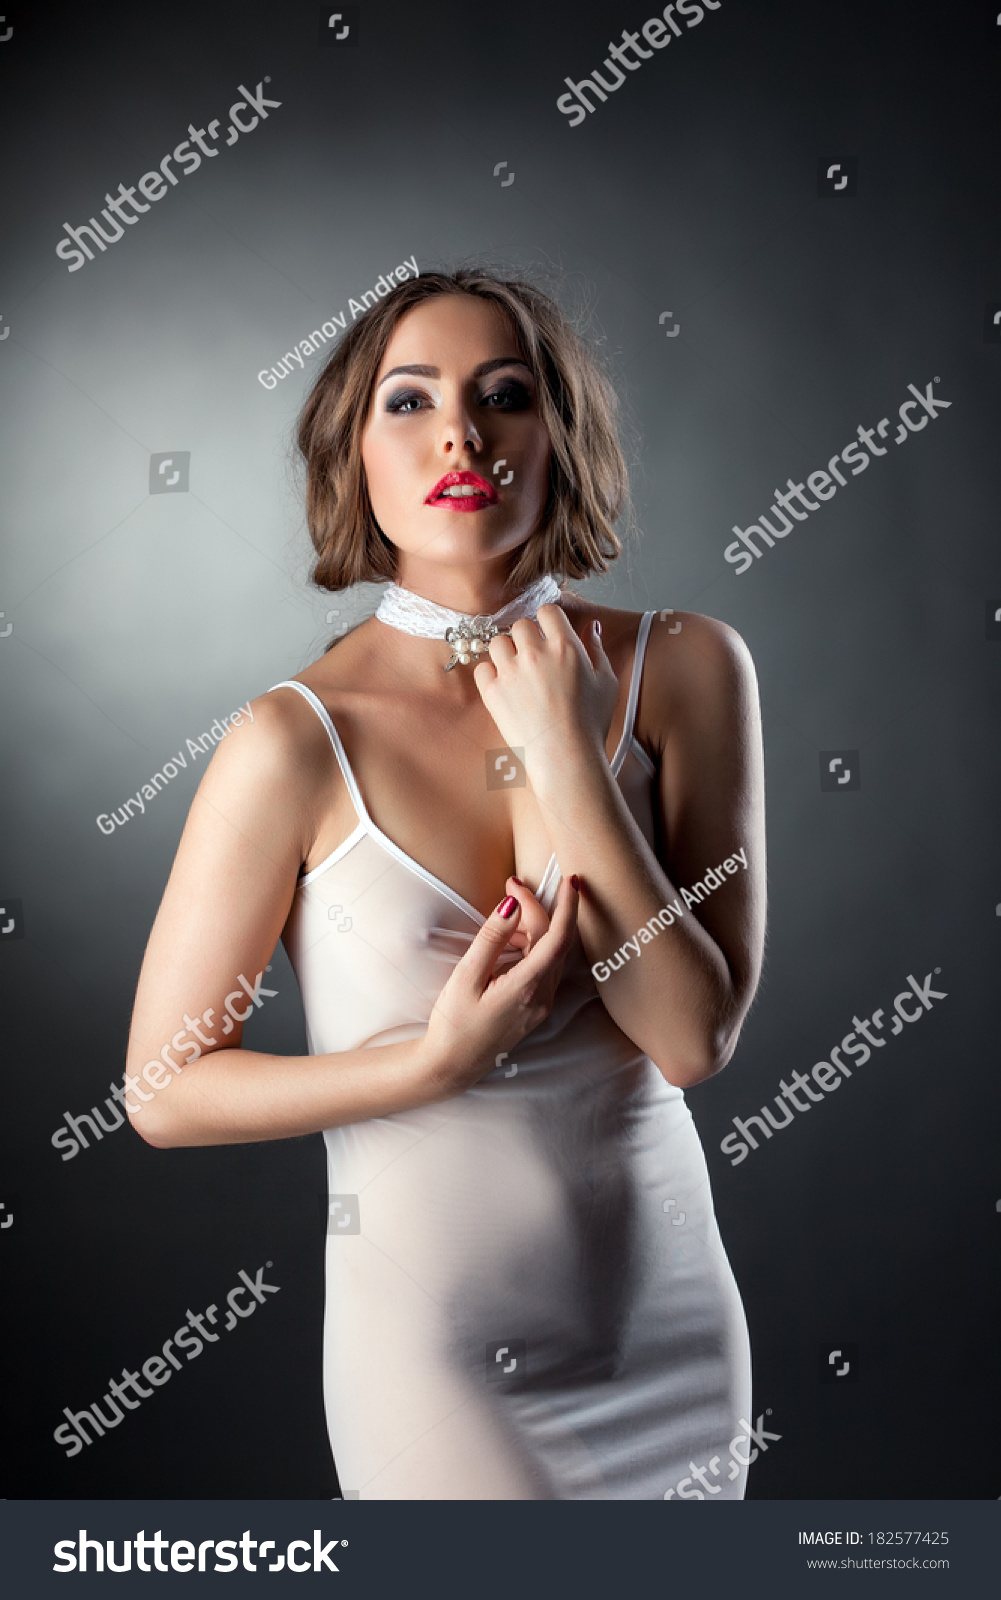 Attractive Sexy Woman Posing White Negligee Stock Photo 182577425